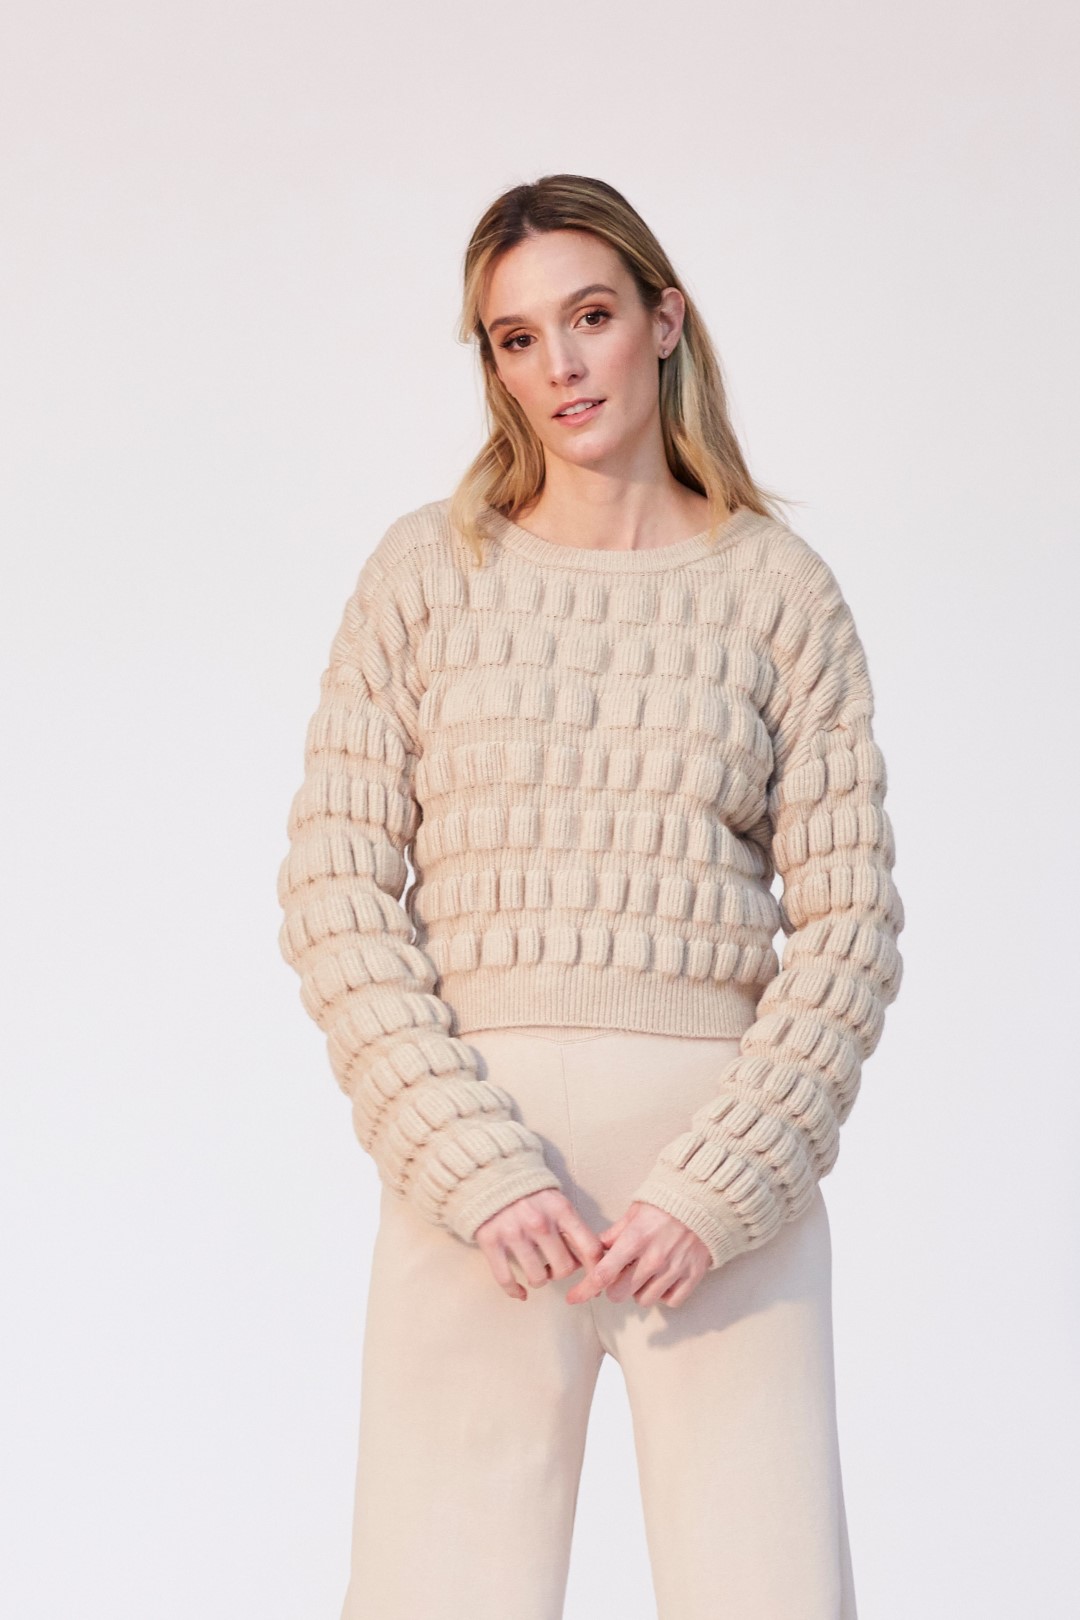 Crop knit sweater  puffy texture